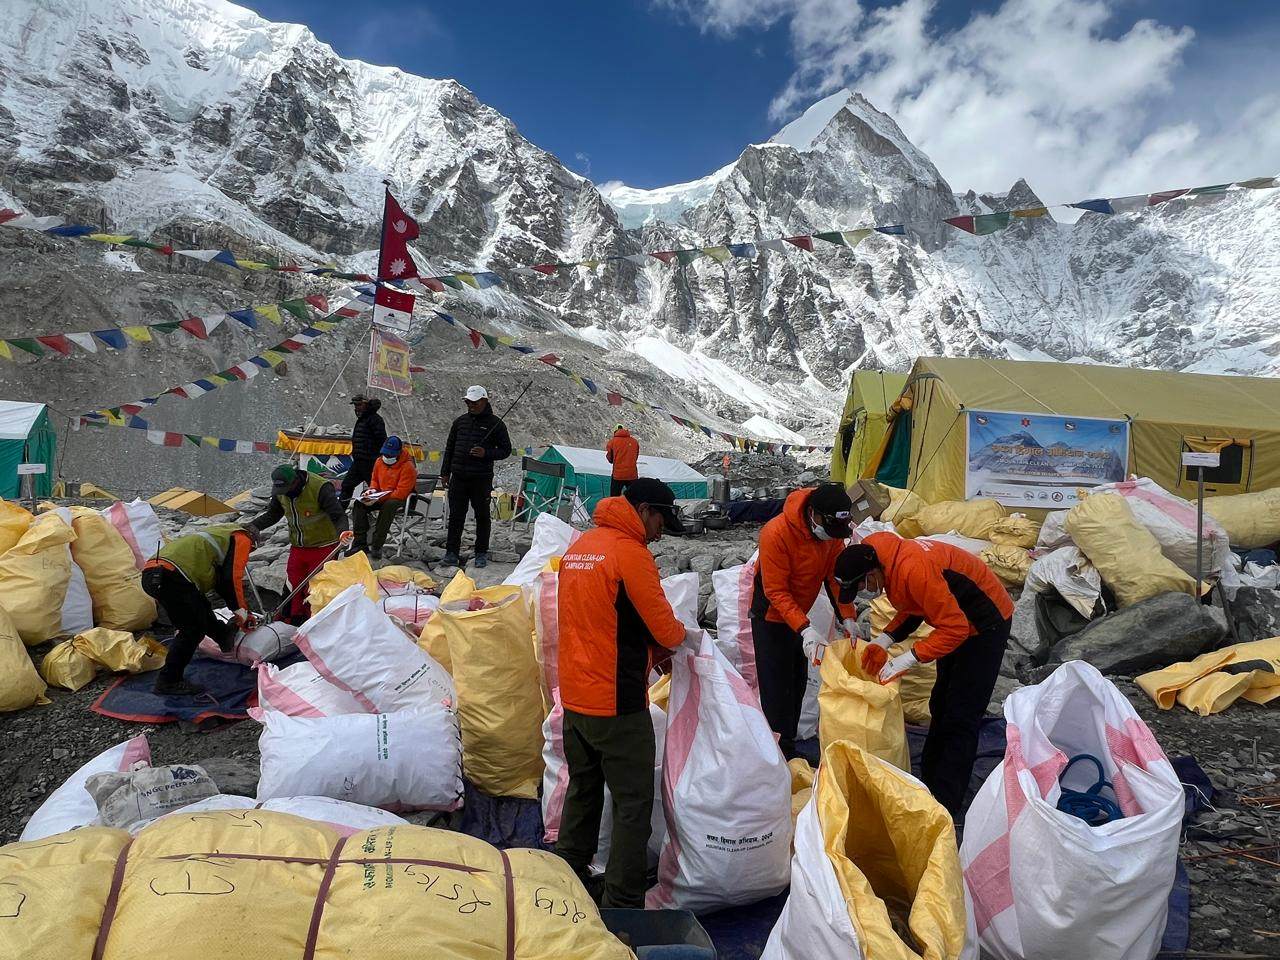 Team members of the Clean Mountain Campaign sort through trash at Everest Base Camp. Photo: Clean Mountain Campaign/Handout